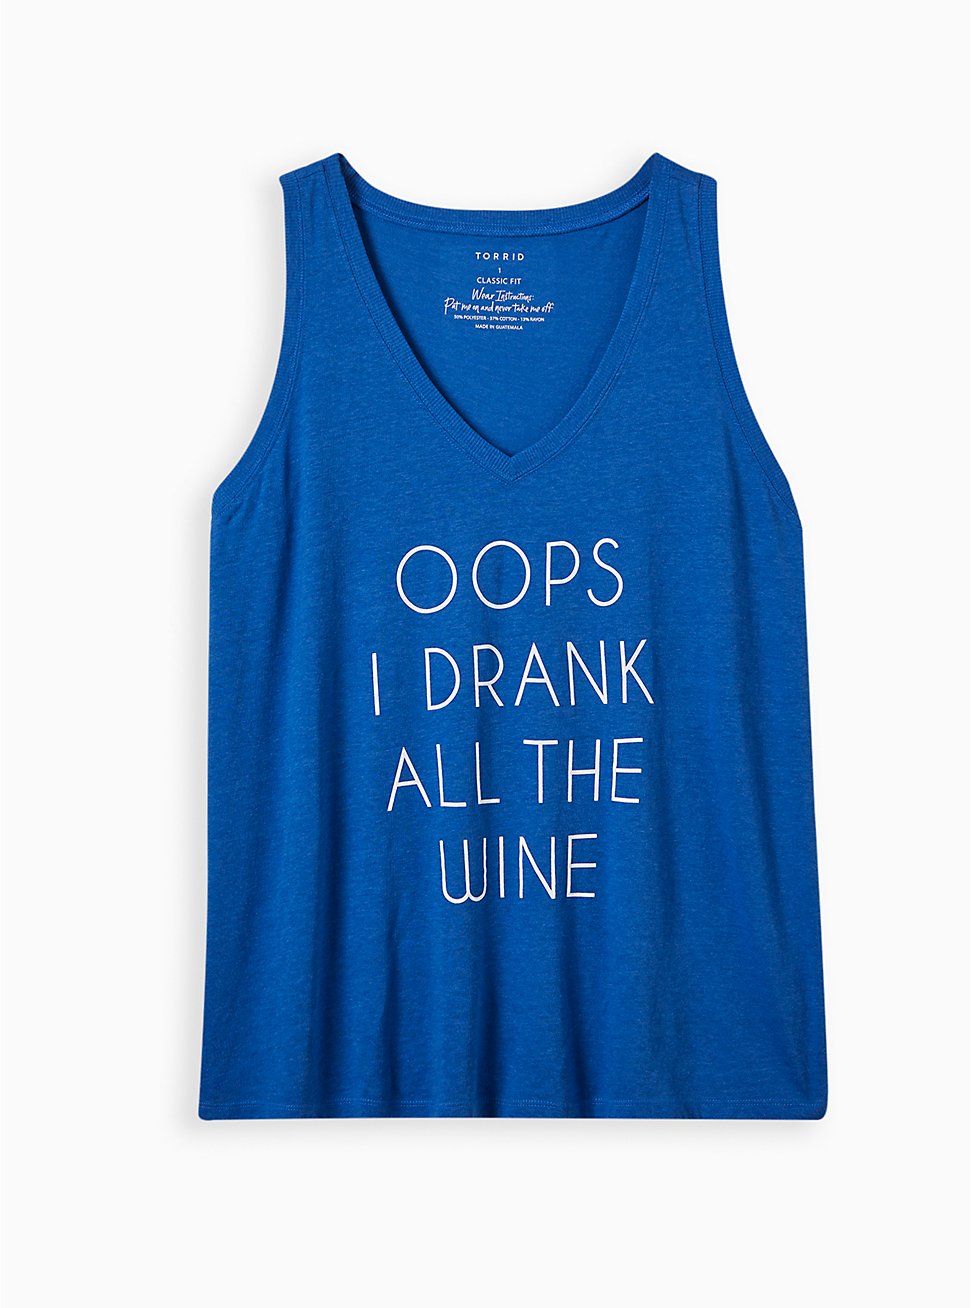 Vintage Tank - Triblend Jersey Drank All The Wine Blue, NAUTICAL BLUE BLUE, hi-res